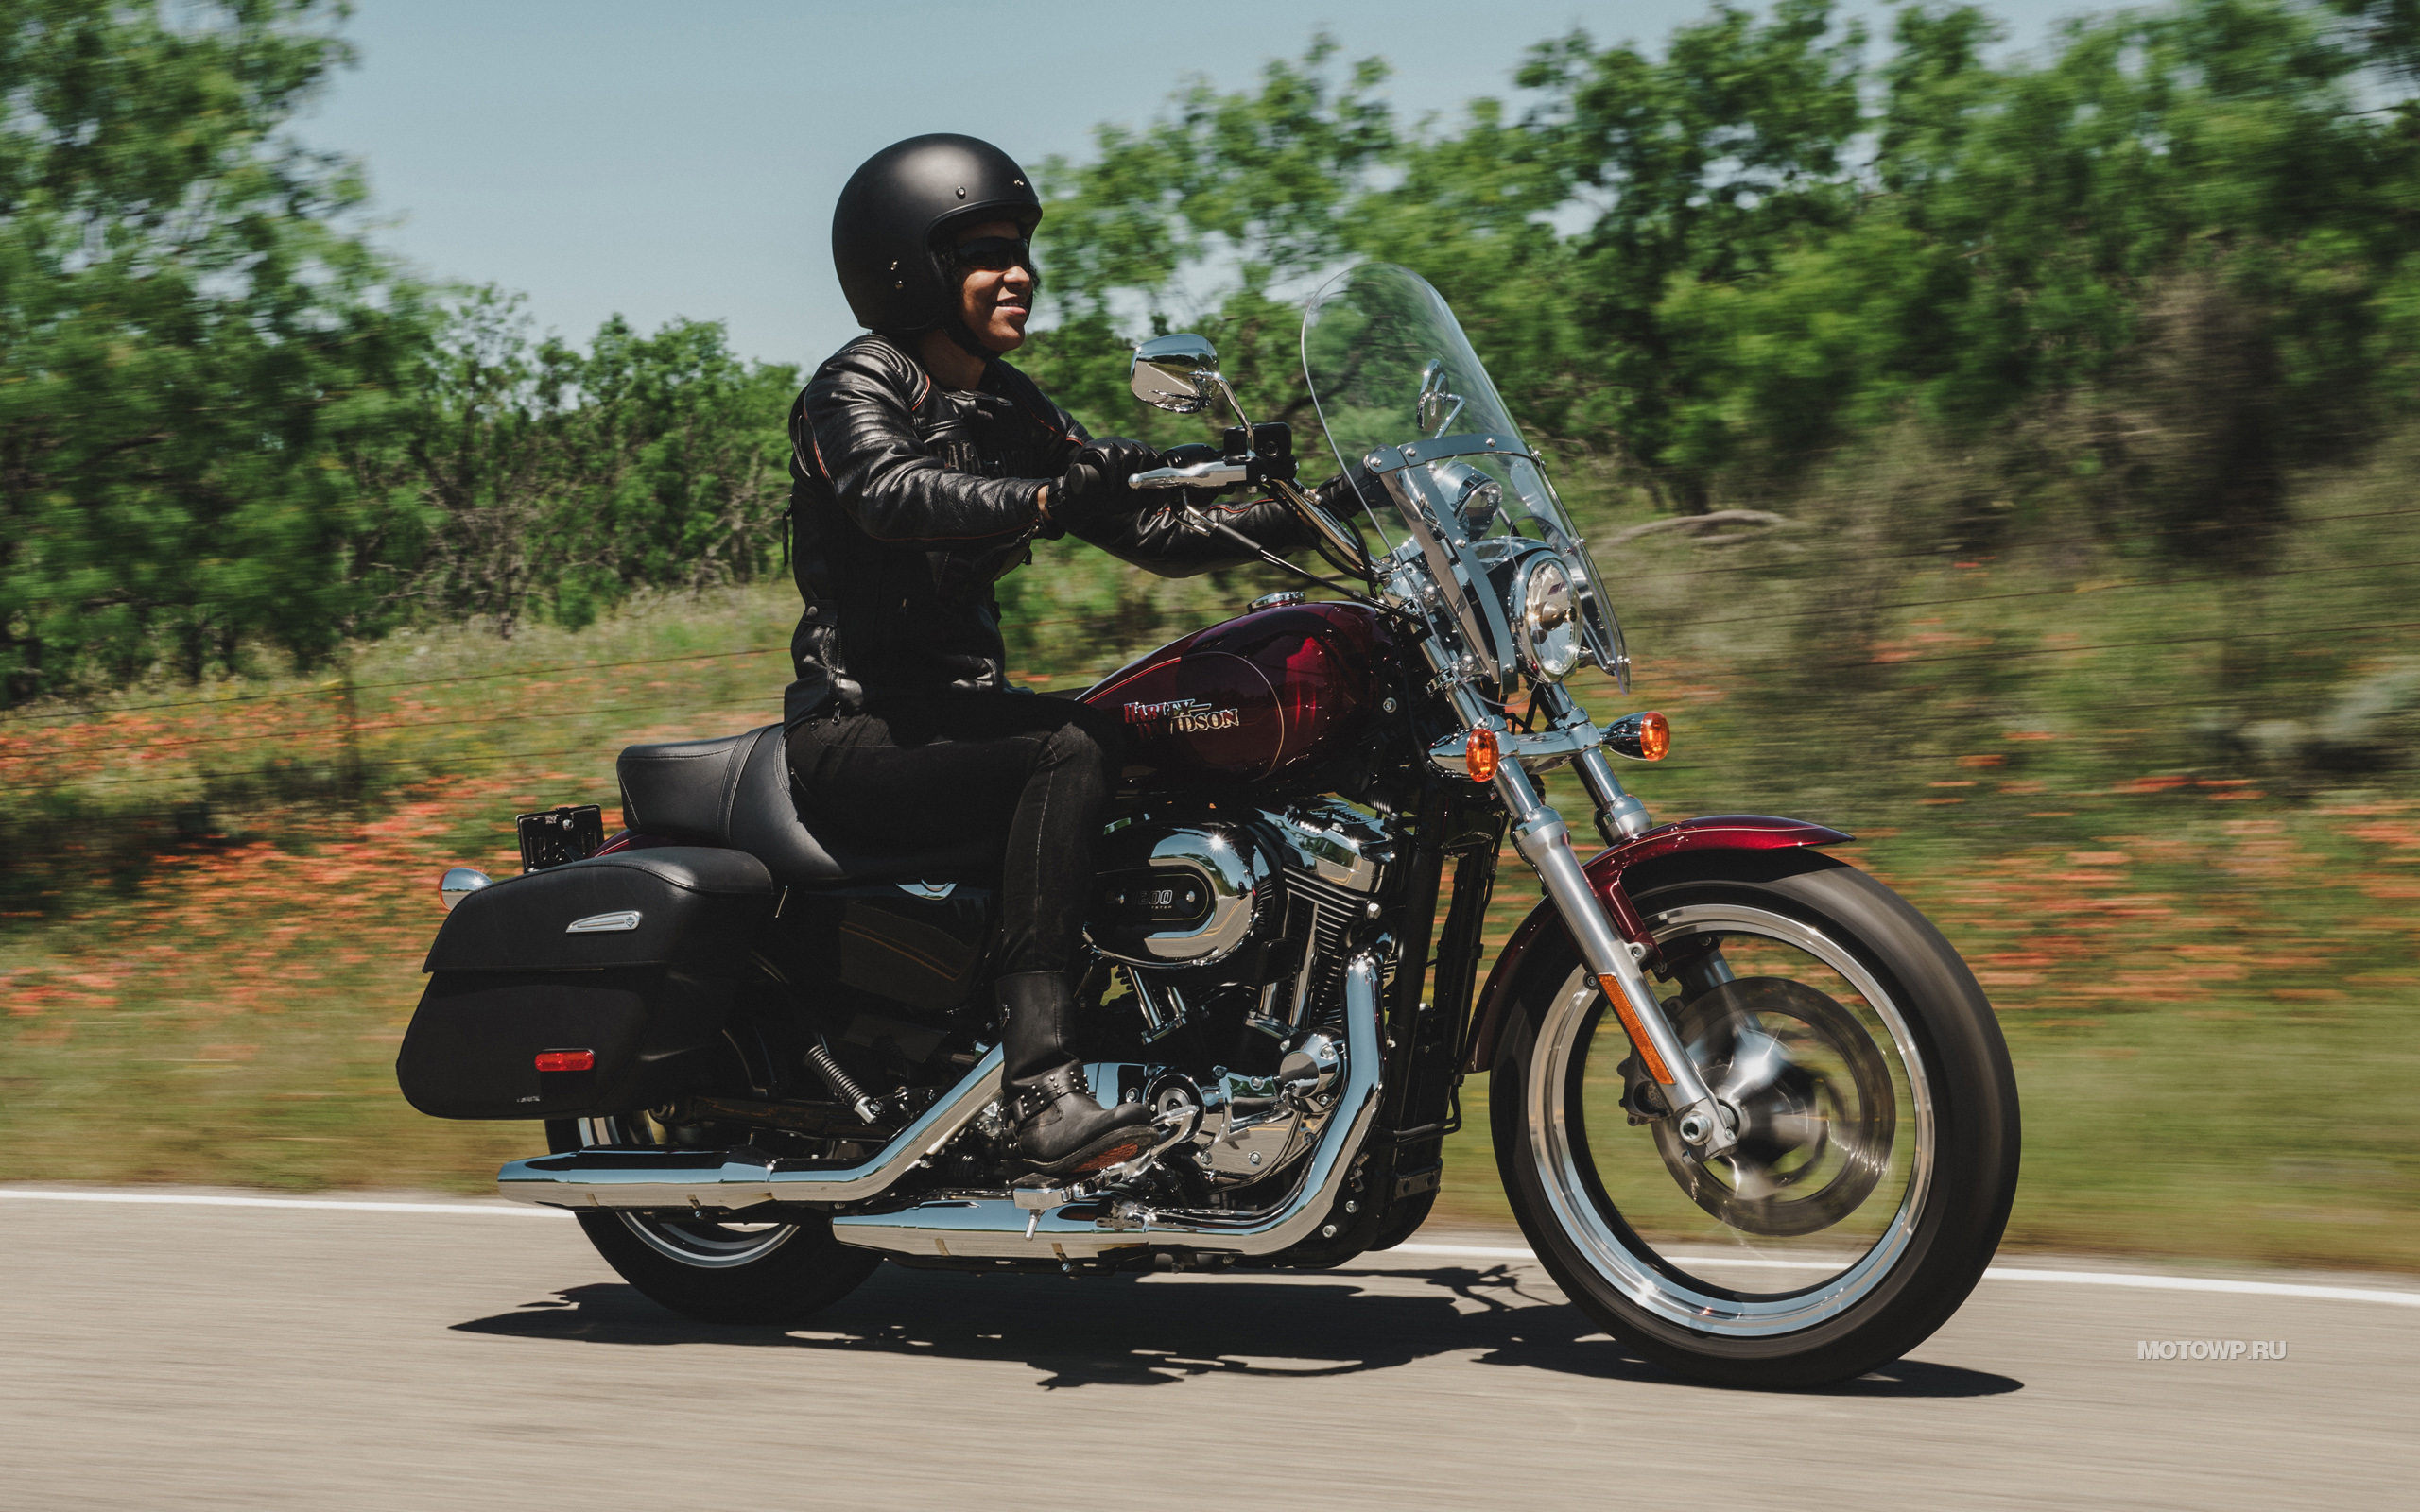 2014 harley-davidson superlow 1200t review: touring & town